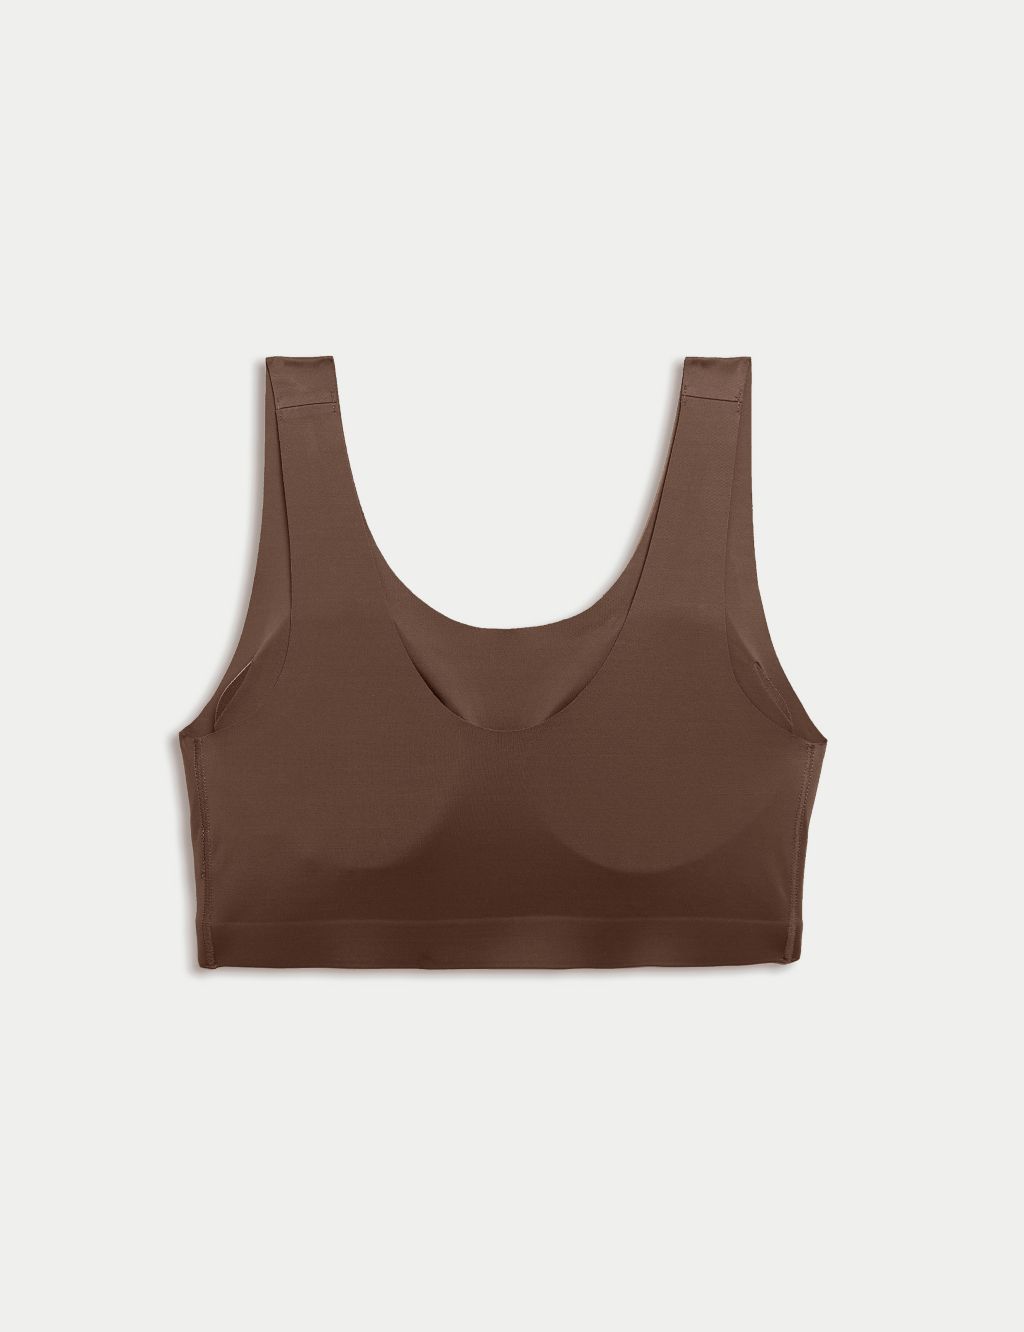 Flexifit™ Non Wired Crop Top image 3